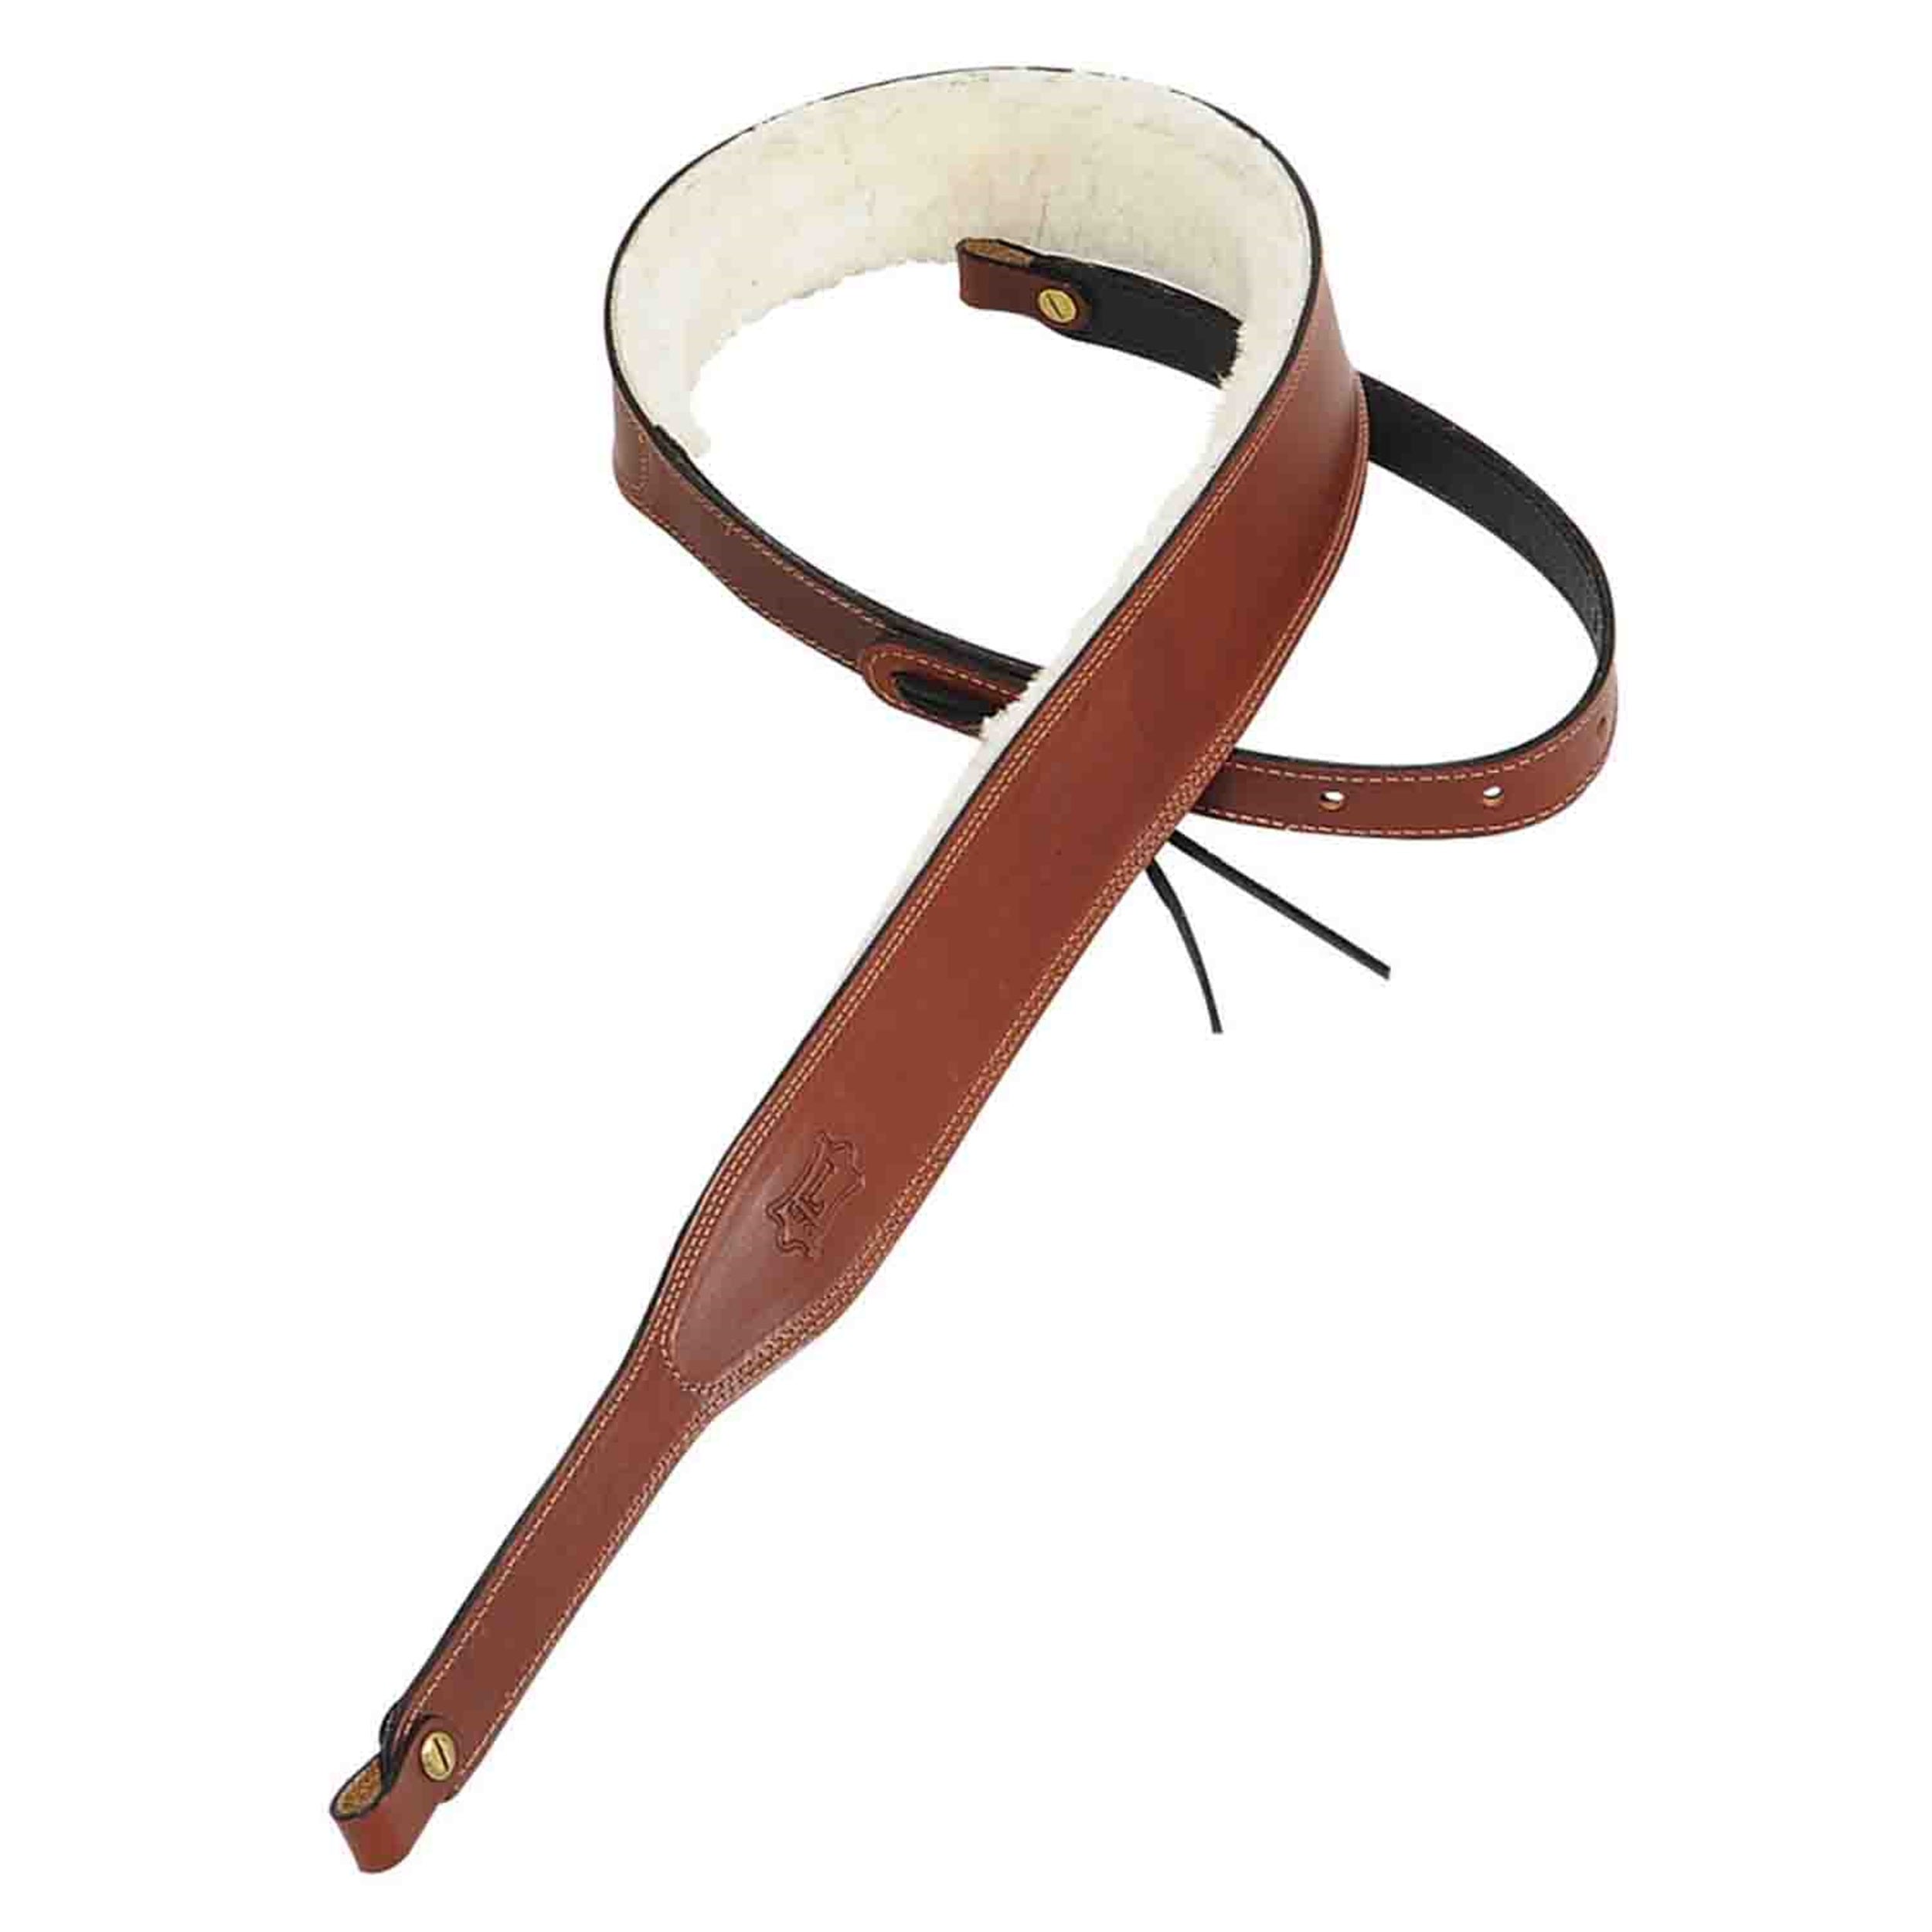 Levy's Leathers PMB42-WAL 2″ Veg-tan Leather Banjo Strap - Brown - Hollywood DJ